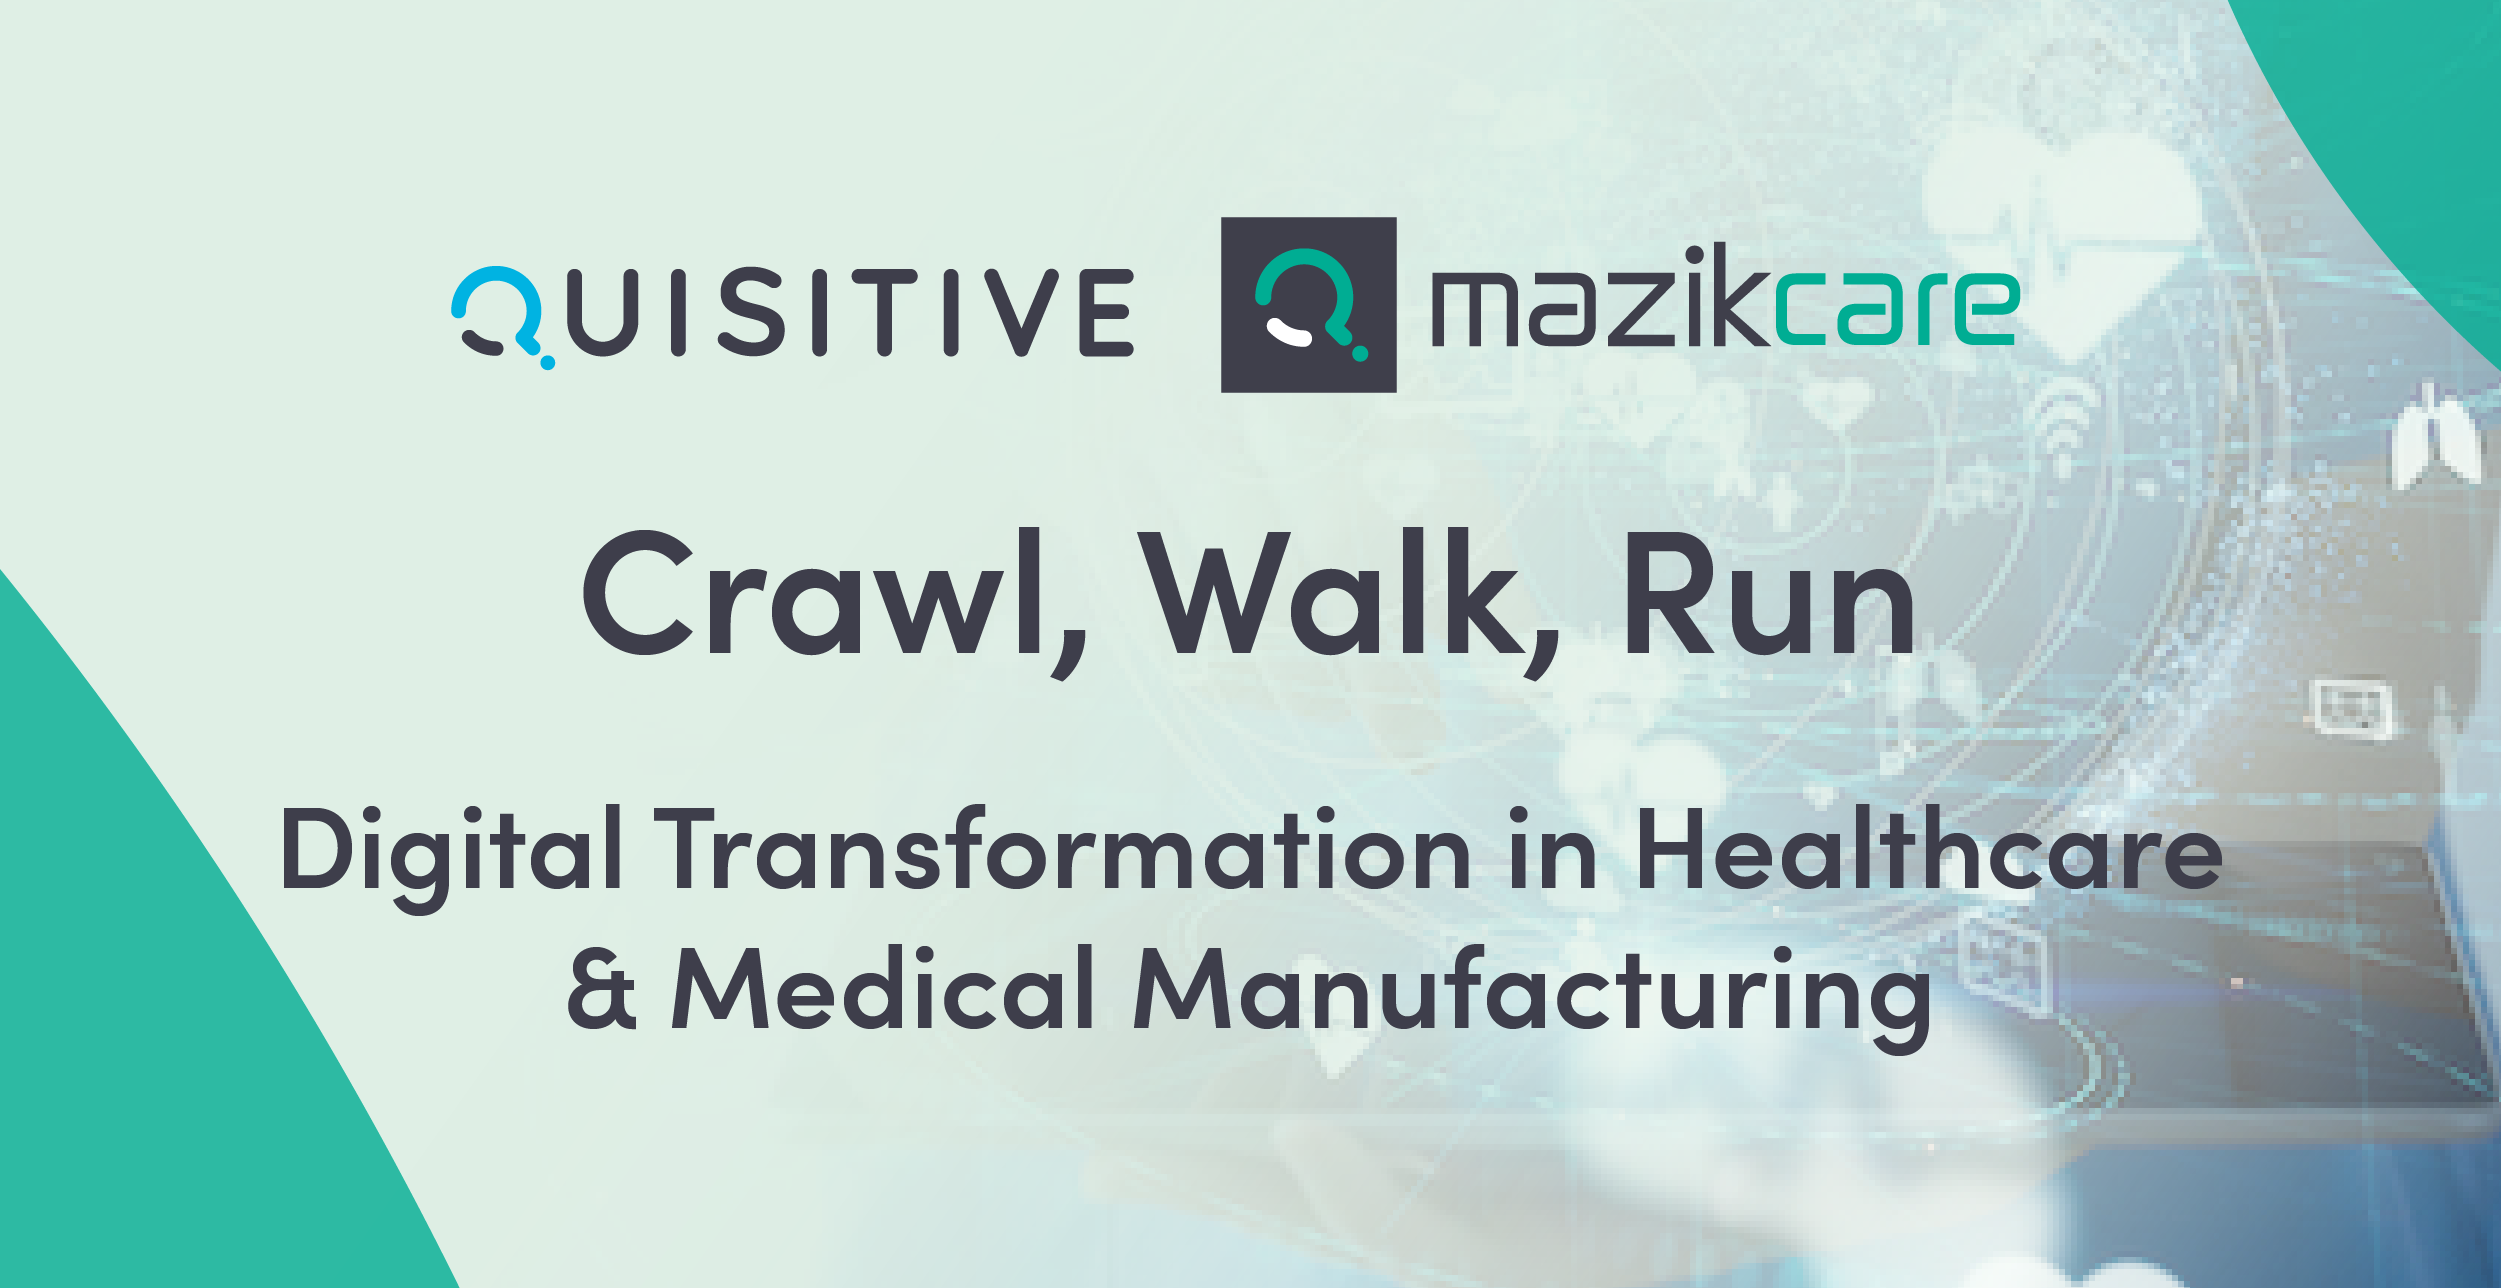 Walk Crawl Run Webinar Series: The Path to Successful Digital Transformation in Healthcare & Medical Manufacturing Feature Image